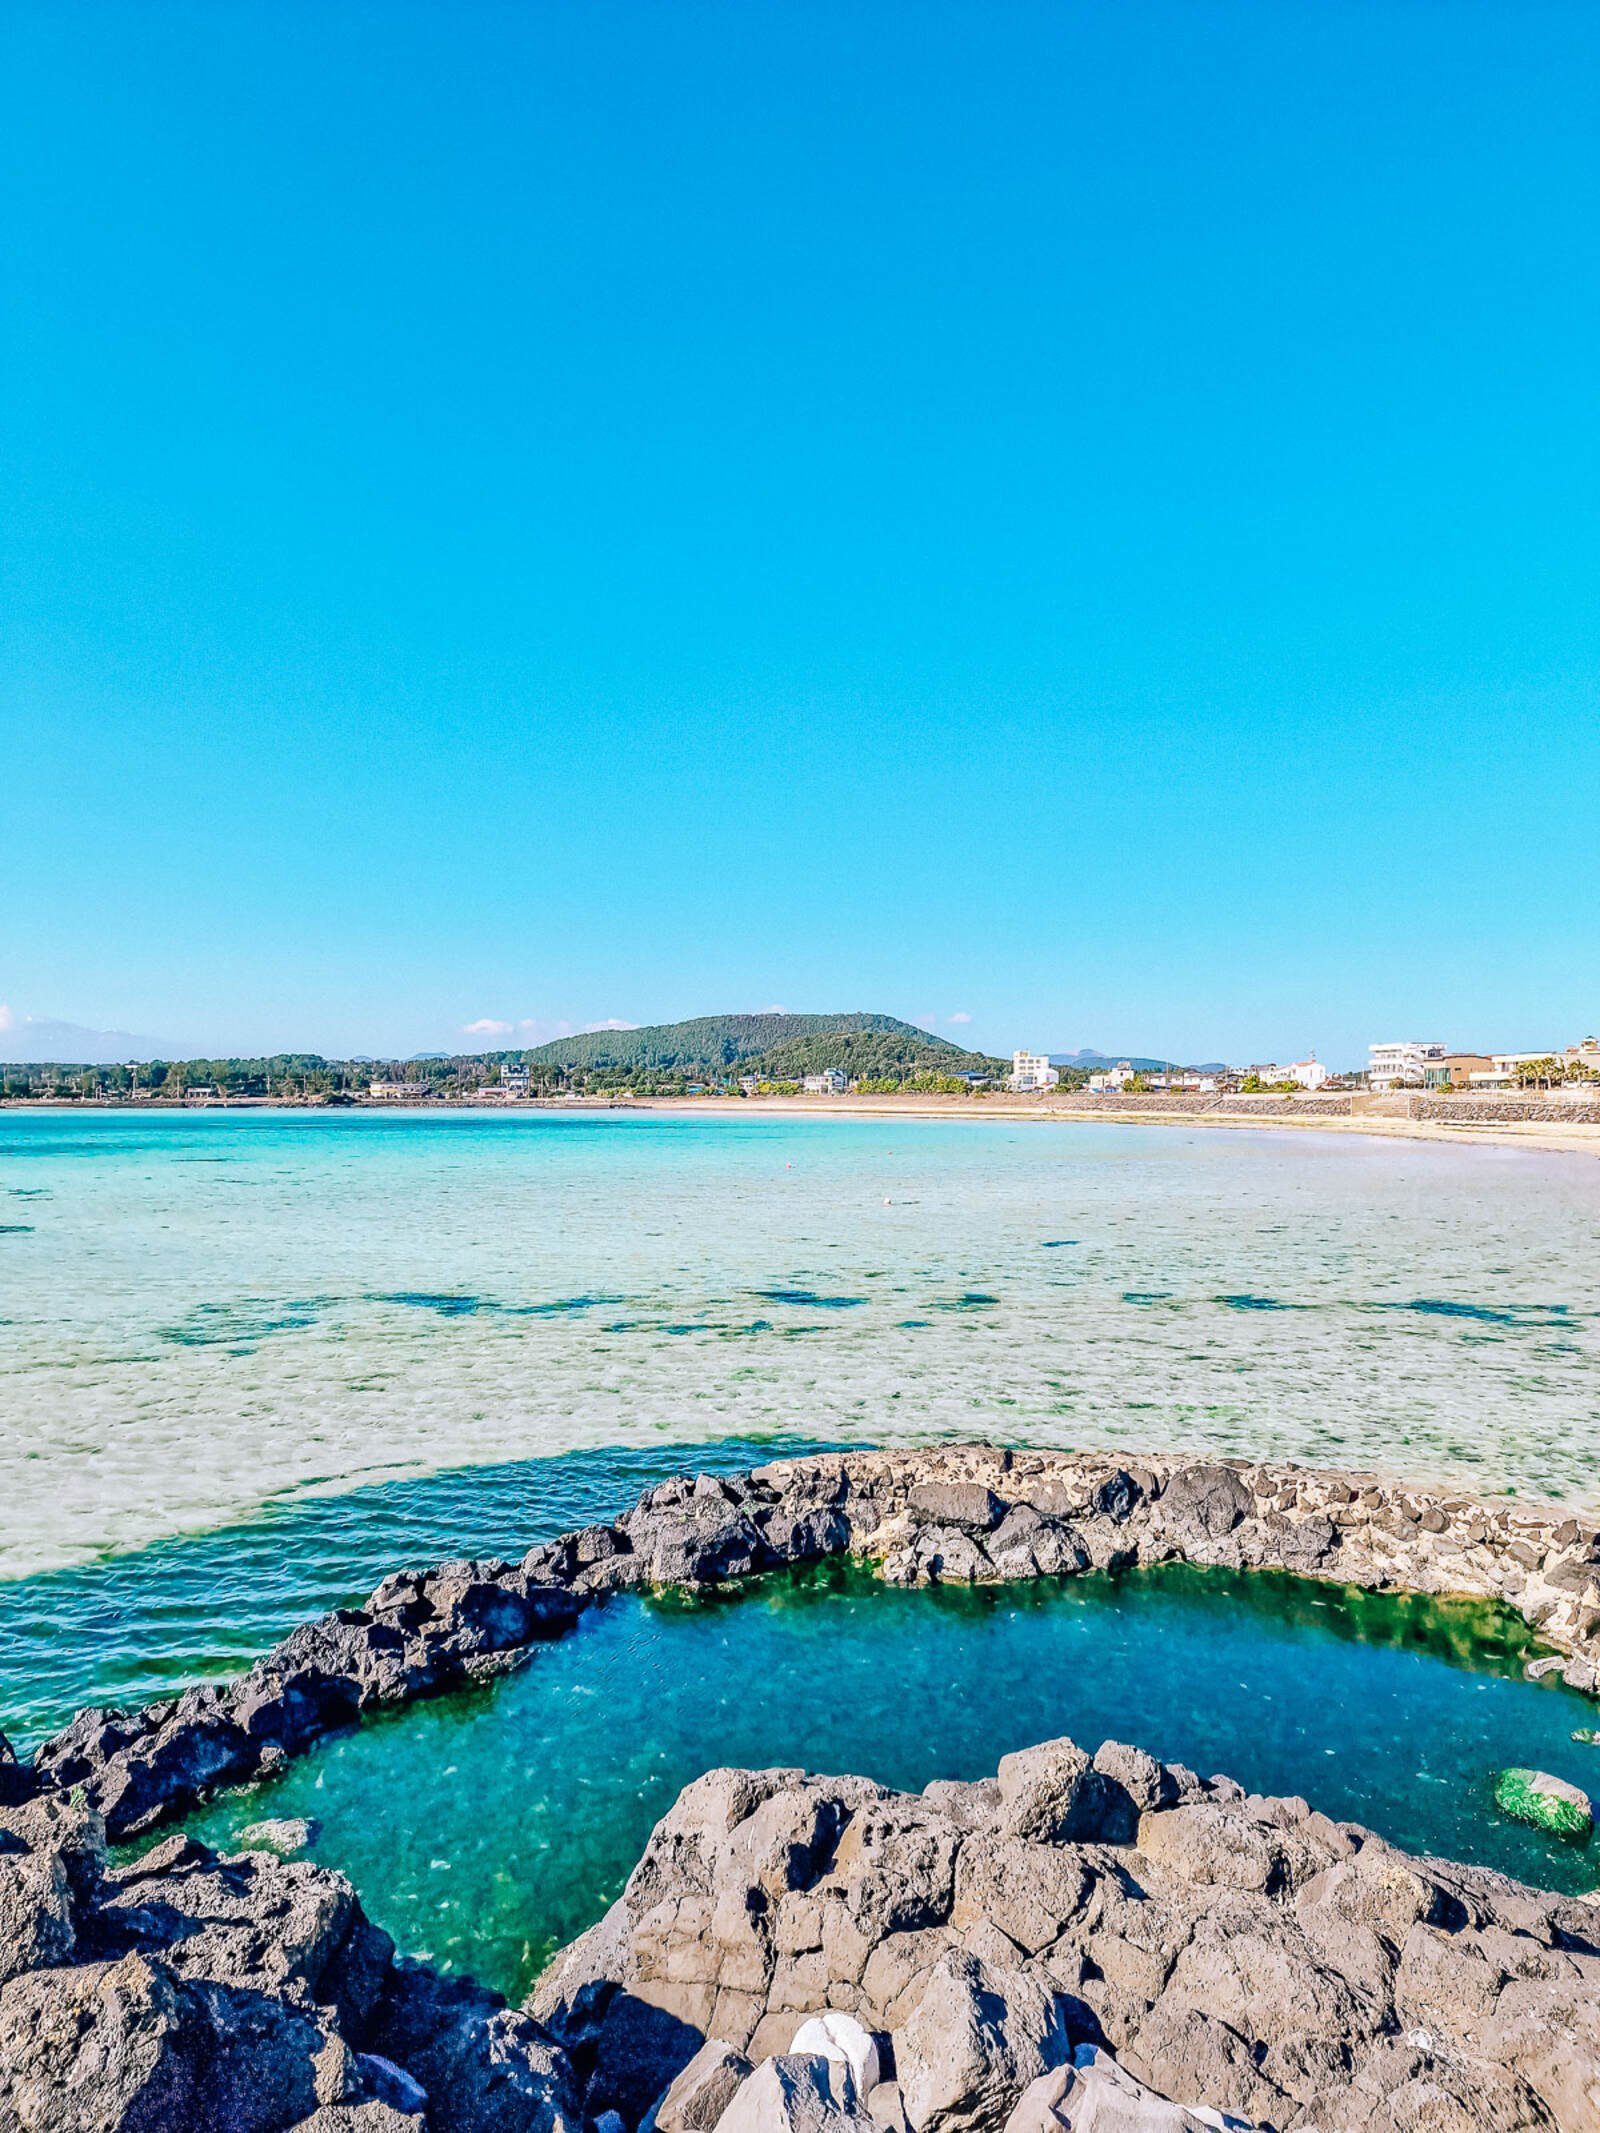 a rock pool surrounded by a calm, turquoise clear bay of water. A beach in the distance on a clear sunny day